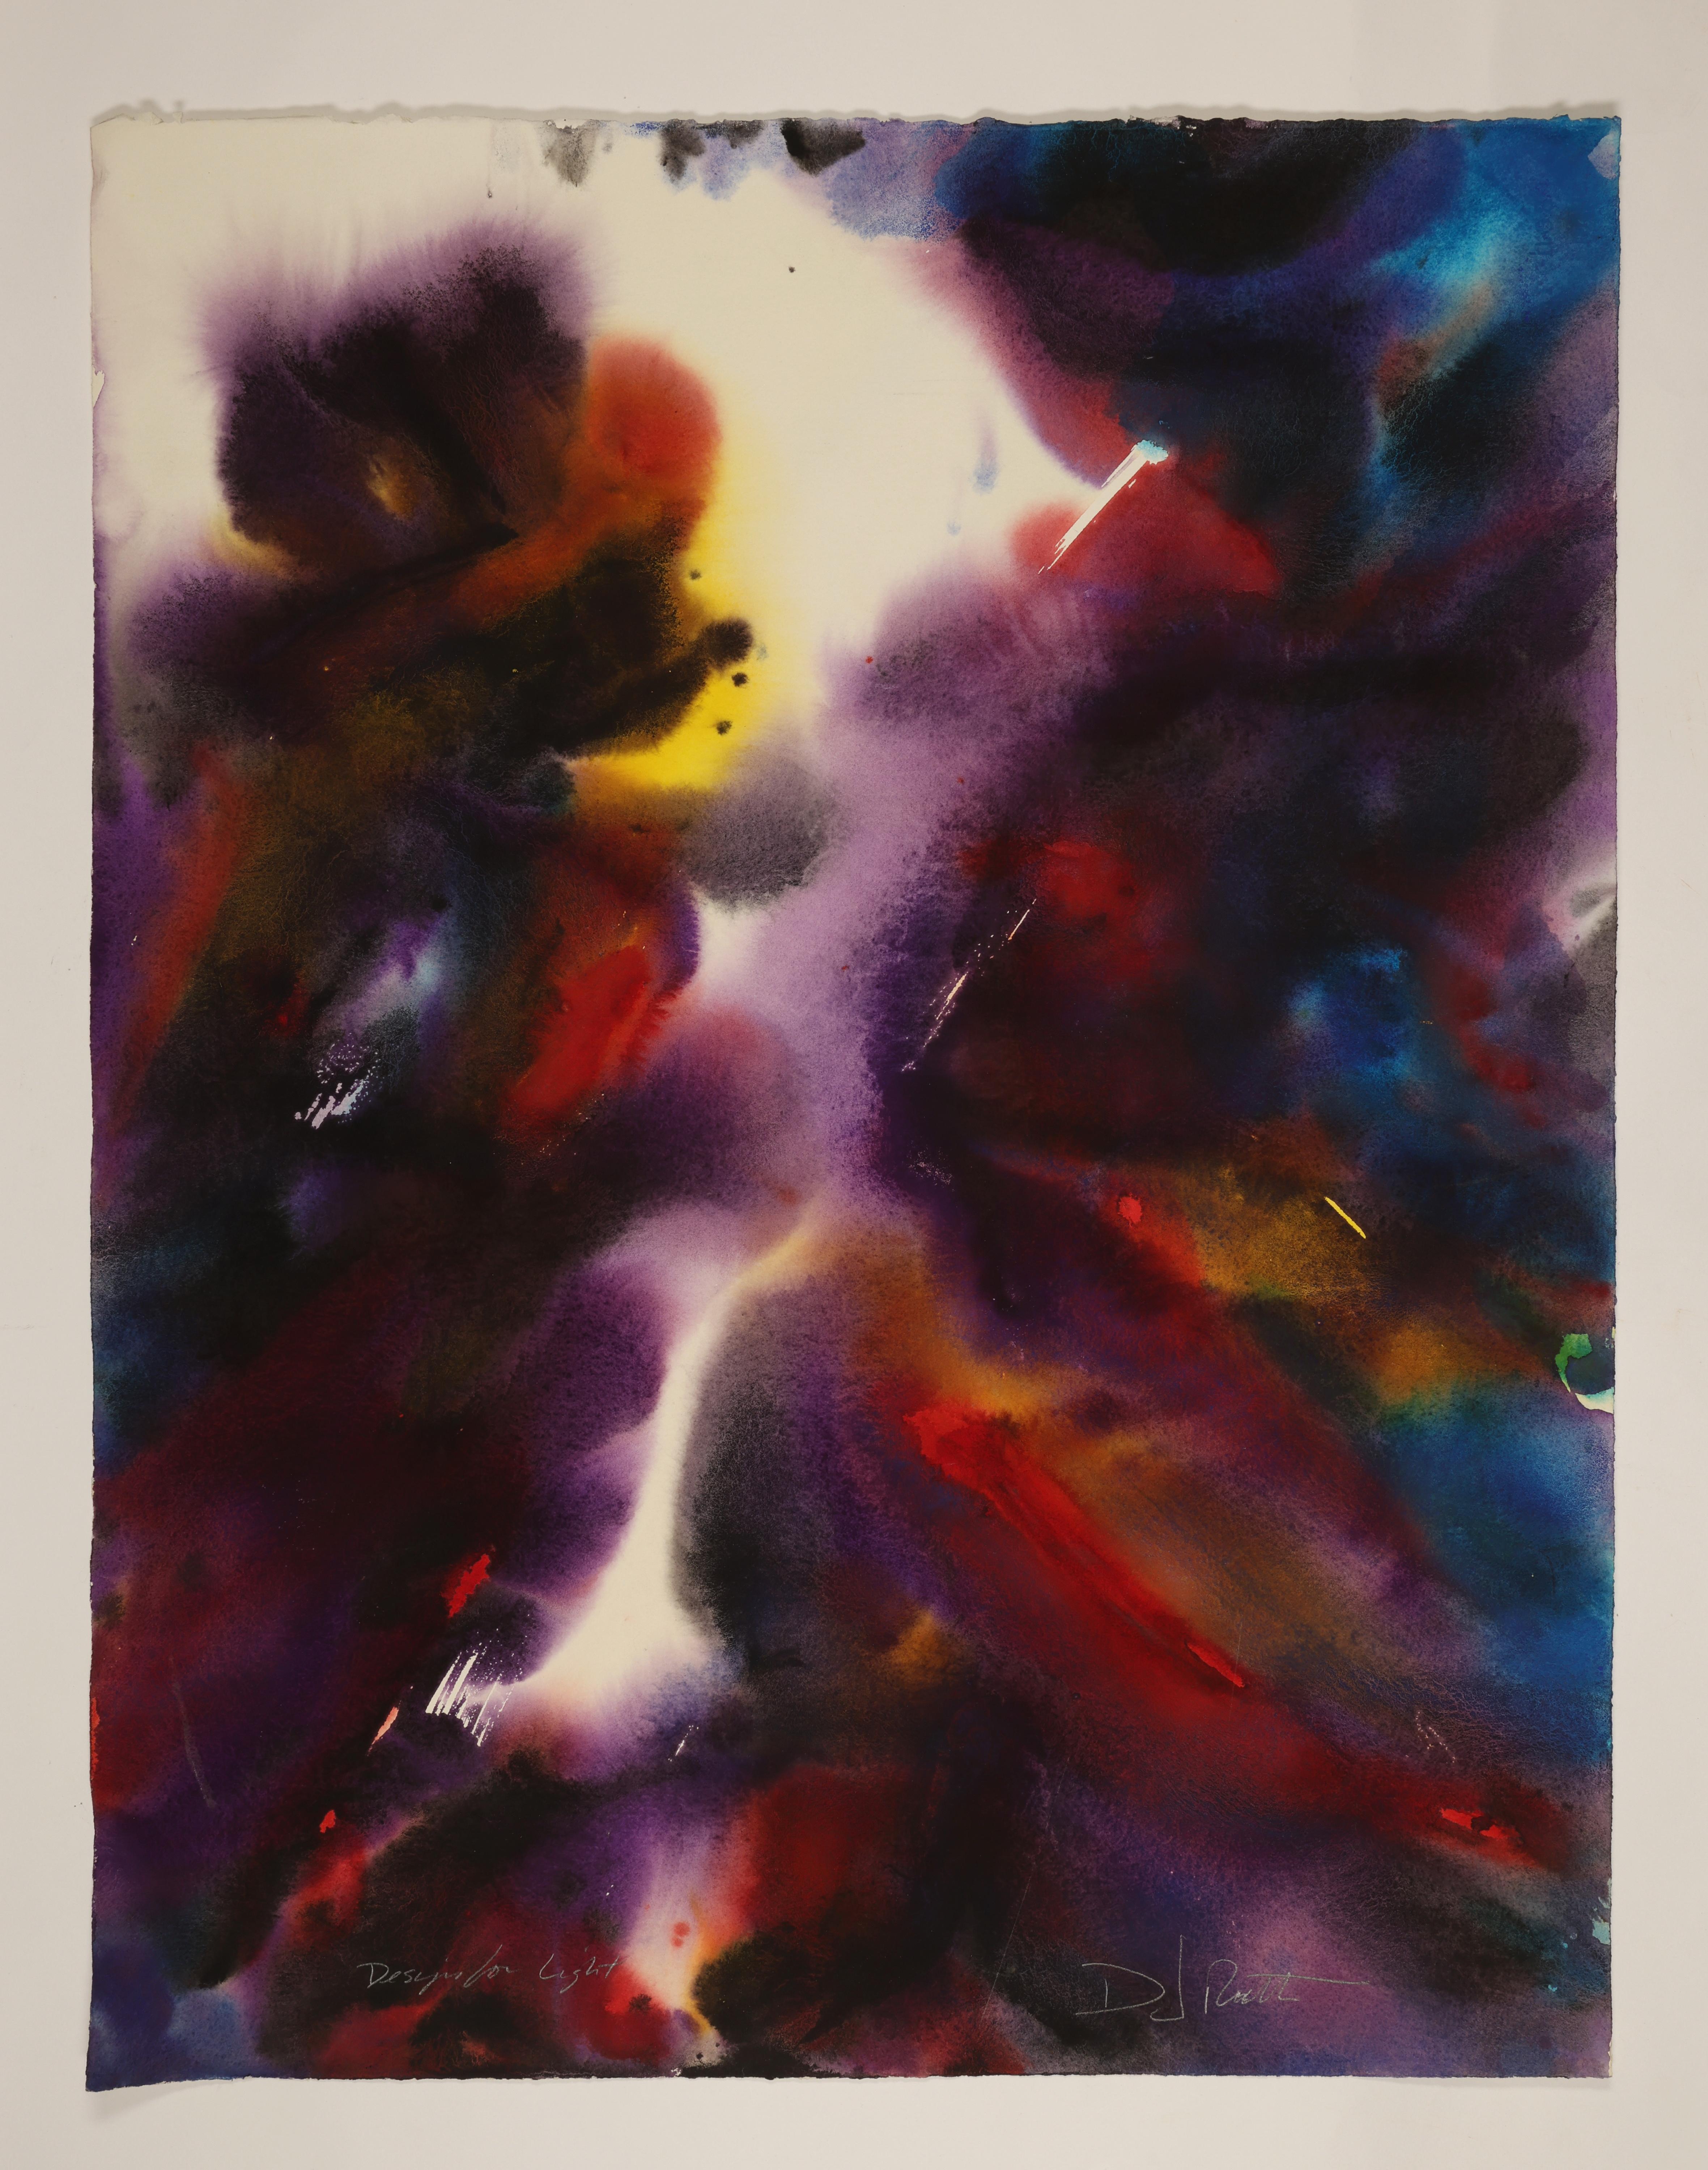 This is a contemporary abstract watercolor painting by artist David Ruth. This series of paintings often feature bright colors and vibrant layouts that draw the viewer in. They are created to help conceptualize his work before turning it into cast